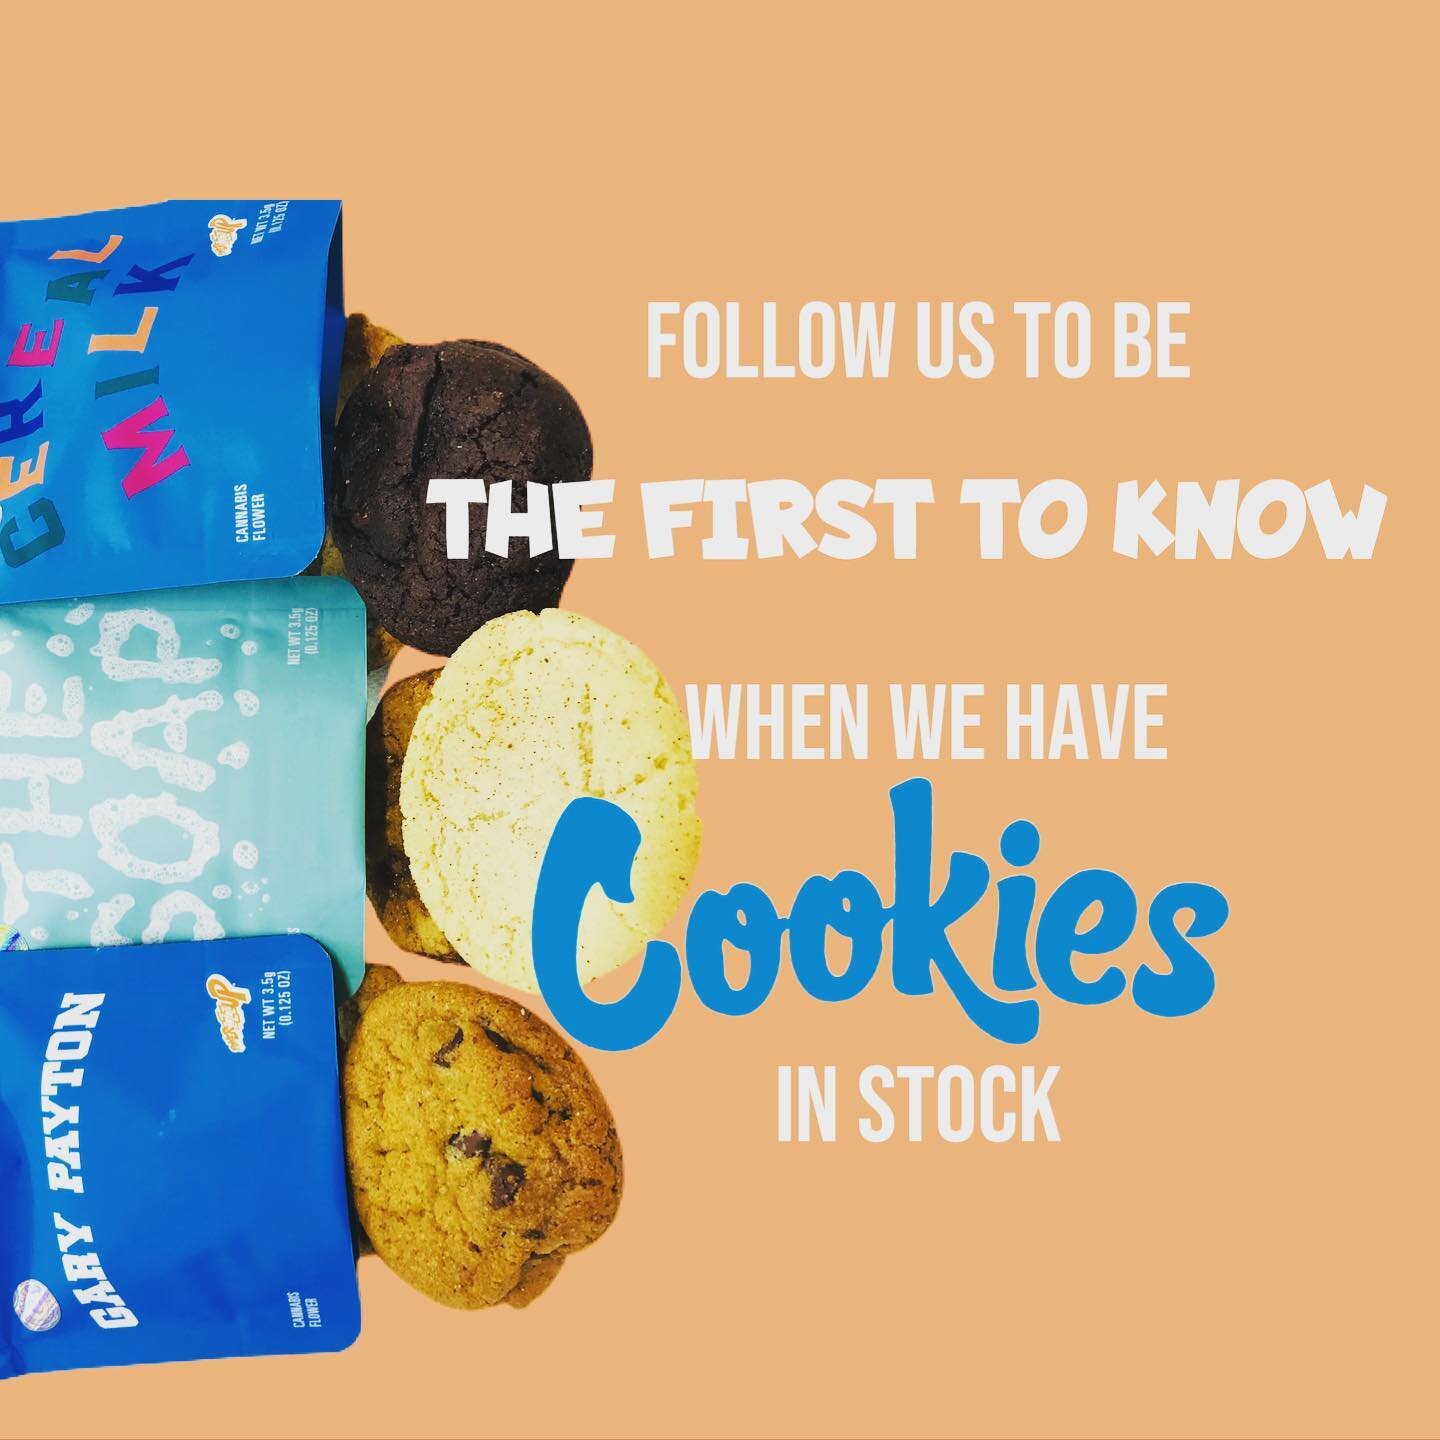 Restocks happening often!!
😋🍪😋🍪😋🍪😋

Follow this page to be the first to know when we&rsquo;ve got cookies in stock

Come see us at Dots Dispensary for great products and everyday deals!!! 
&bull;
805 𝙉 𝙃𝙊𝙒𝘼𝙍𝘿 𝙎𝙏
𝙎𝙏𝙊𝙍𝙀 𝙃𝙊𝙐𝙍𝙎: